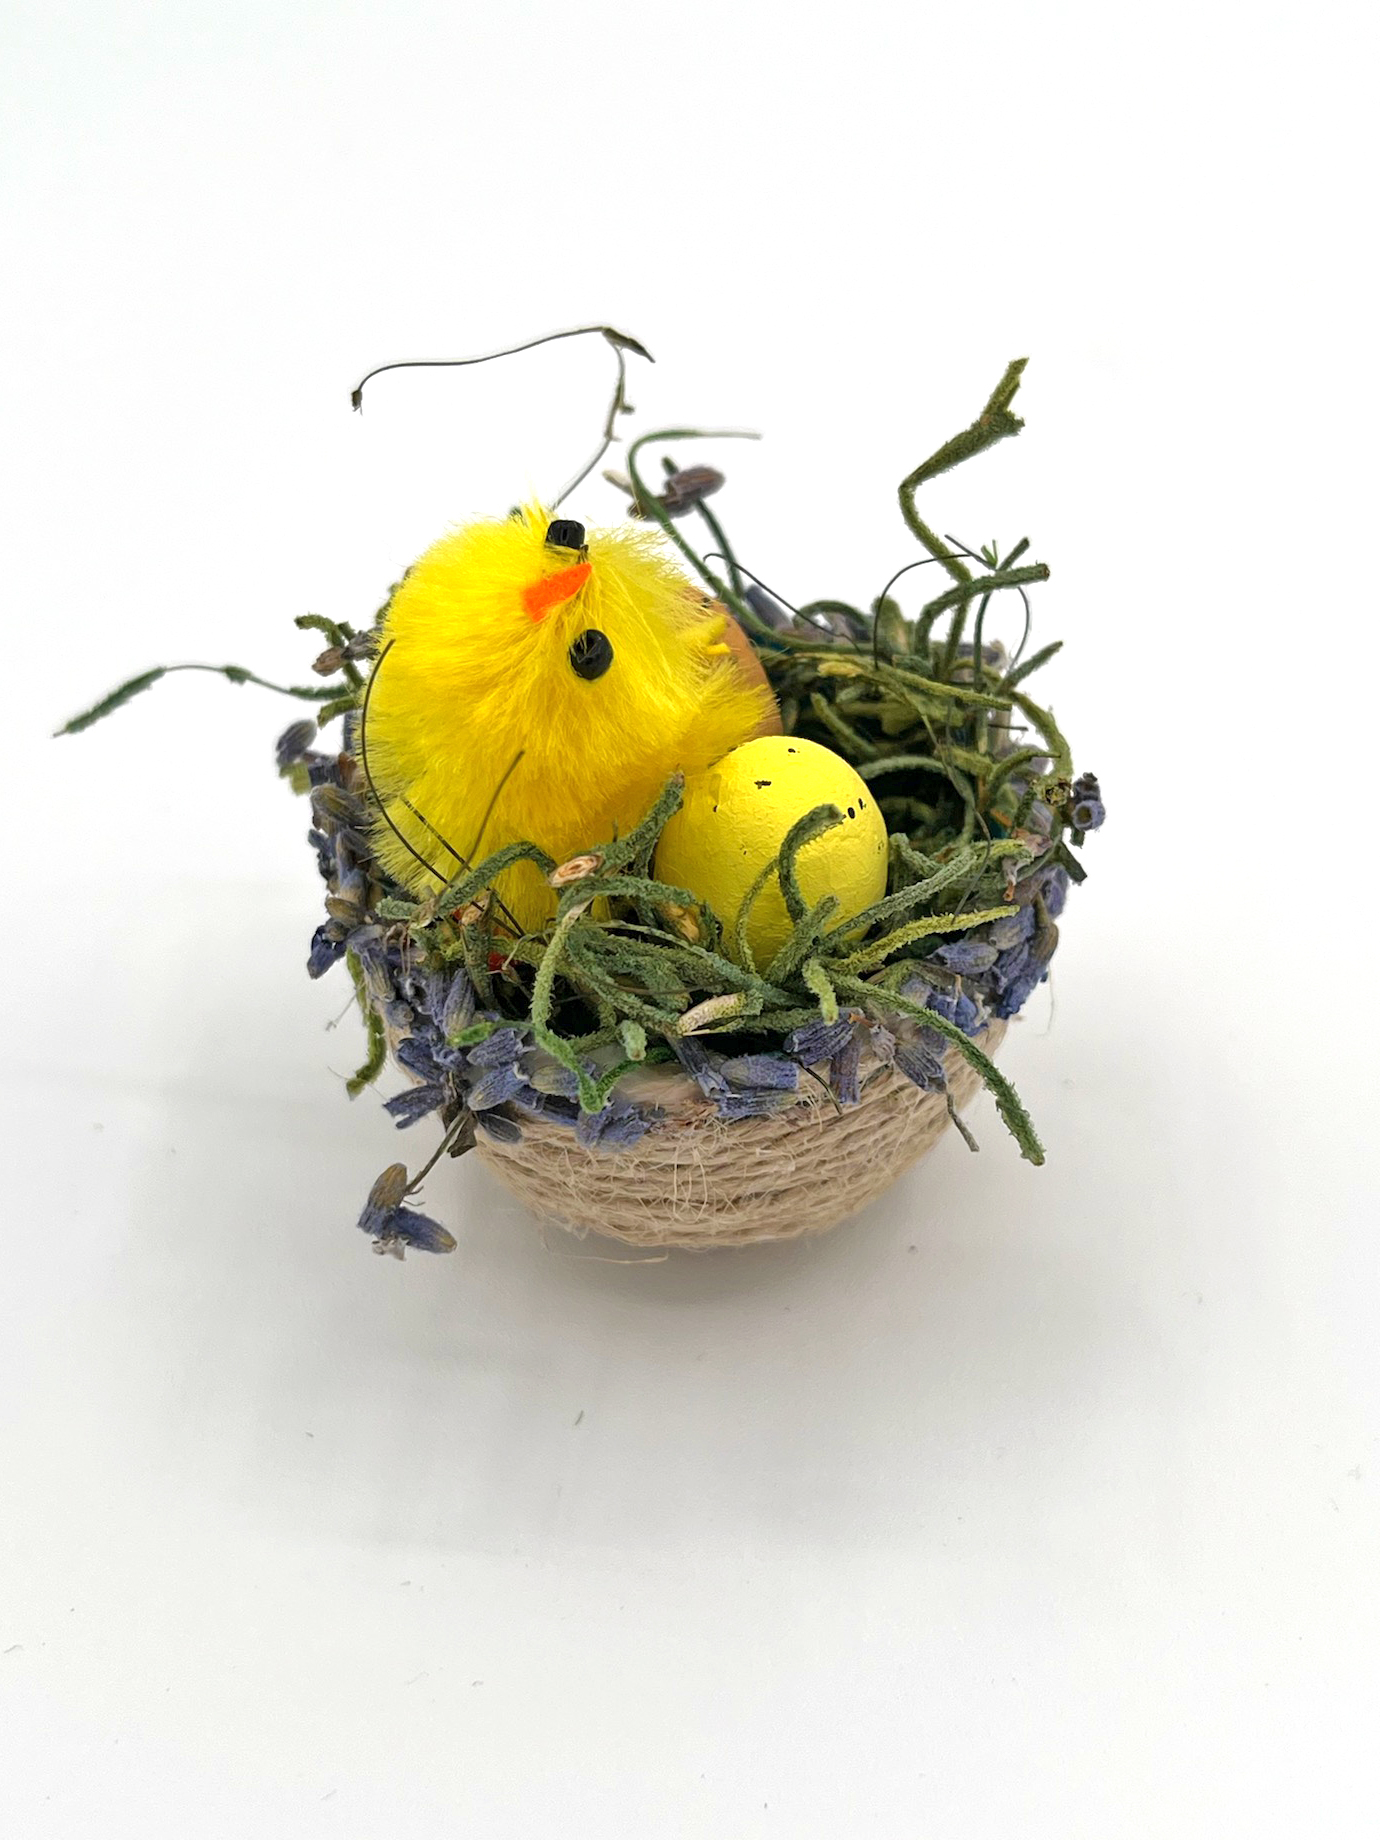 Spring into a new season with crafty fun at the Fond du Lac Public Library